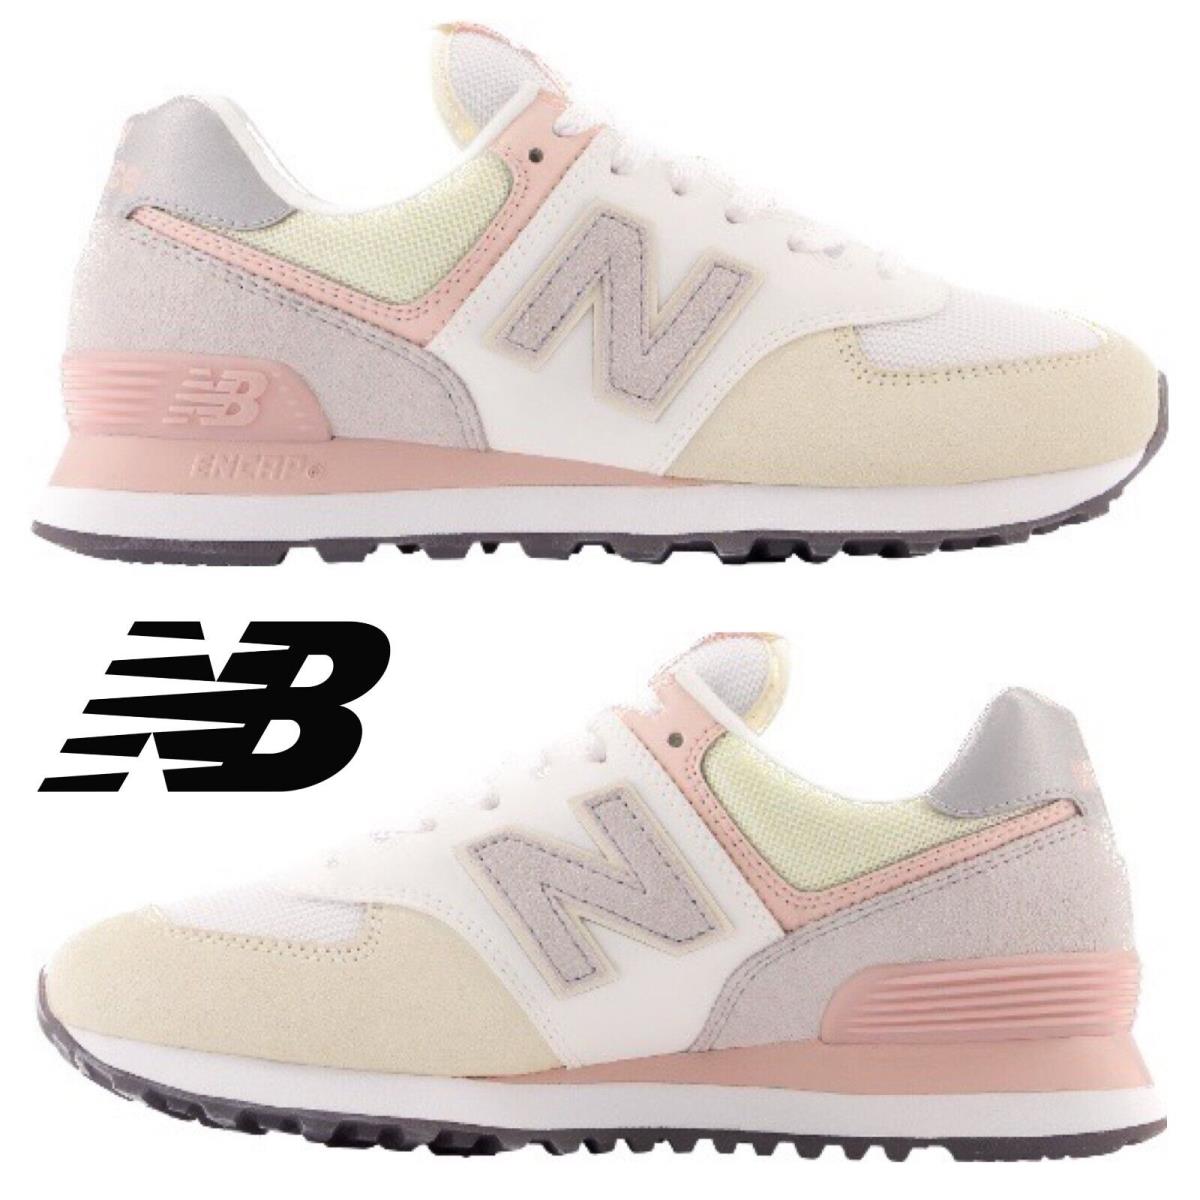 Balance 574 Women`s Sneakers Casual Shoes Classic Running Sport Pink